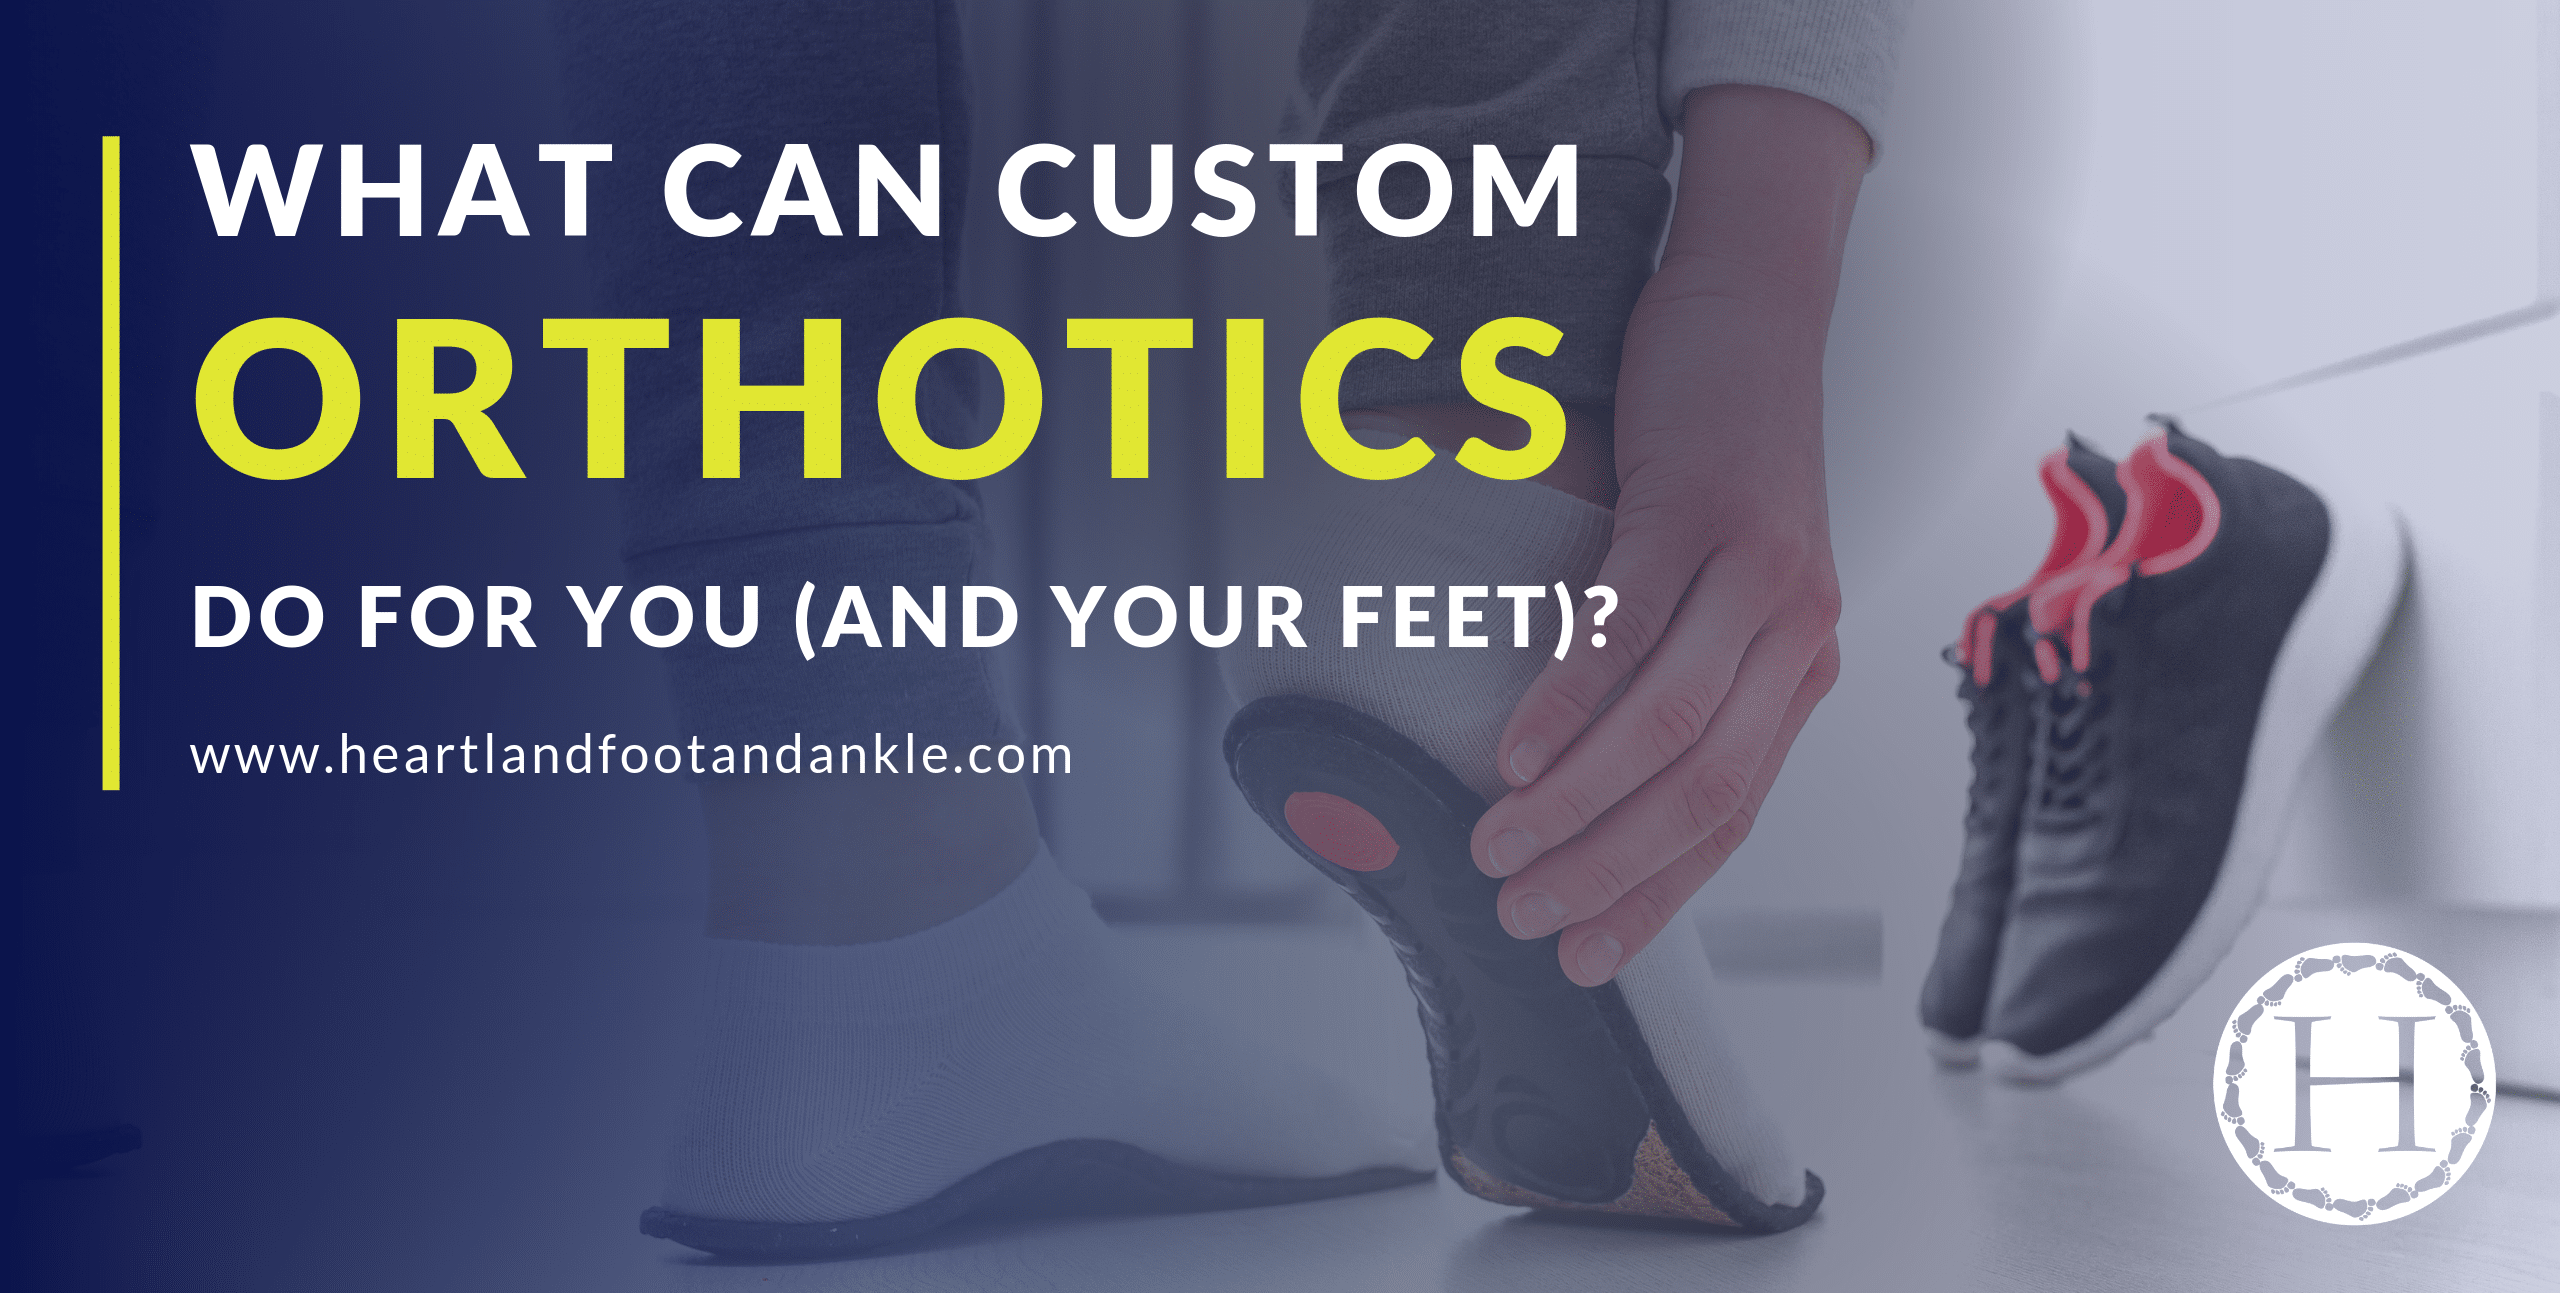 What Can Custom Orthotics Do for You